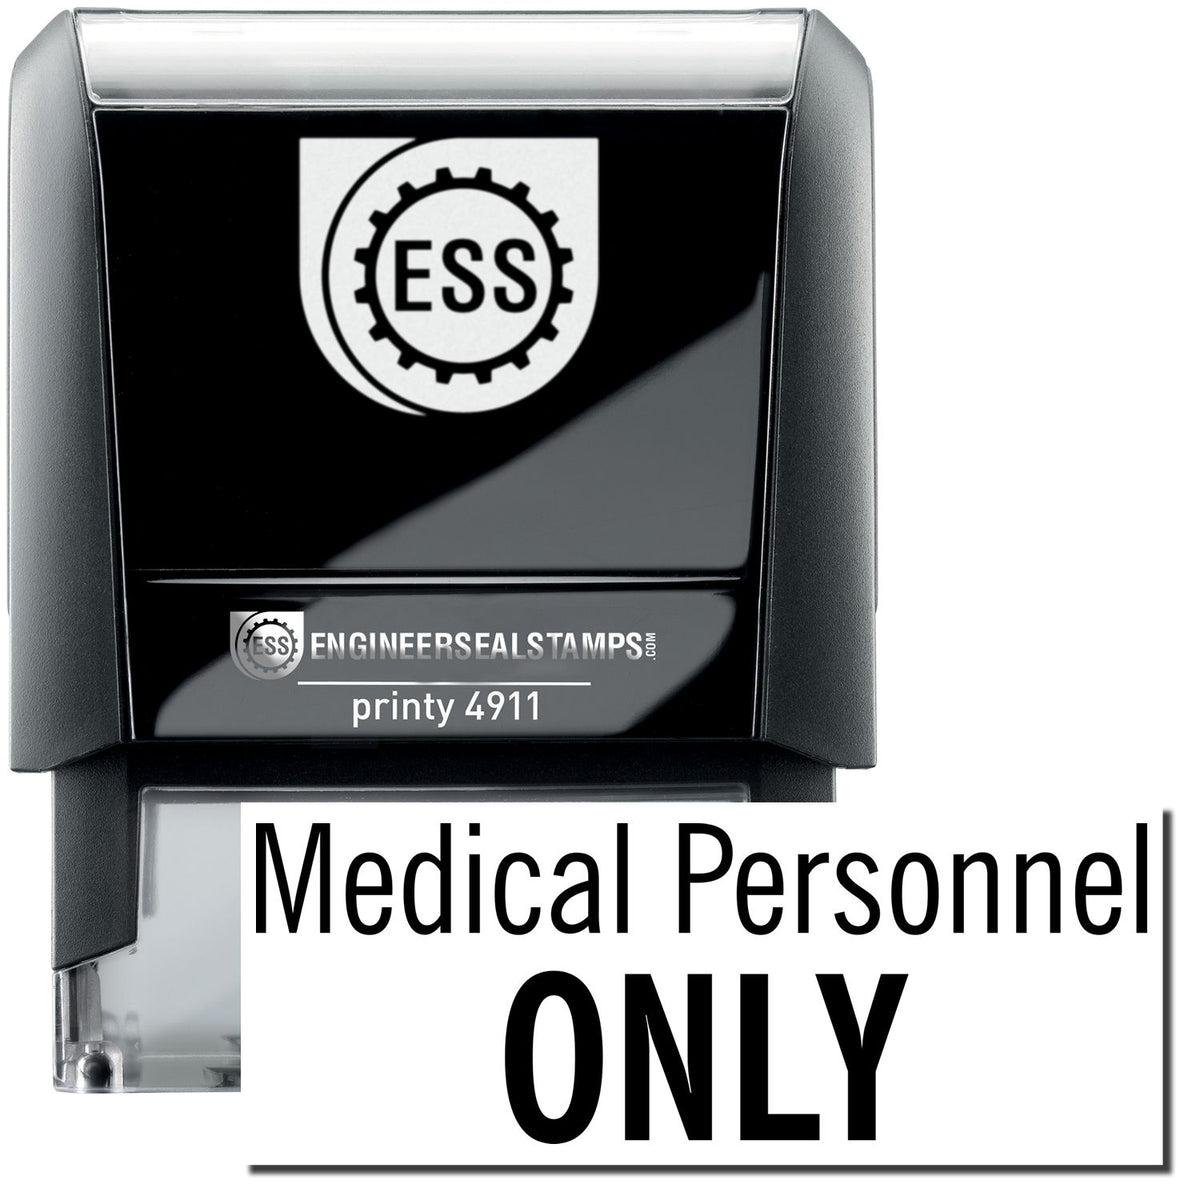 A self-inking stamp with a stamped image showing how the text &quot;Medical Personnel ONLY&quot; is displayed after stamping.